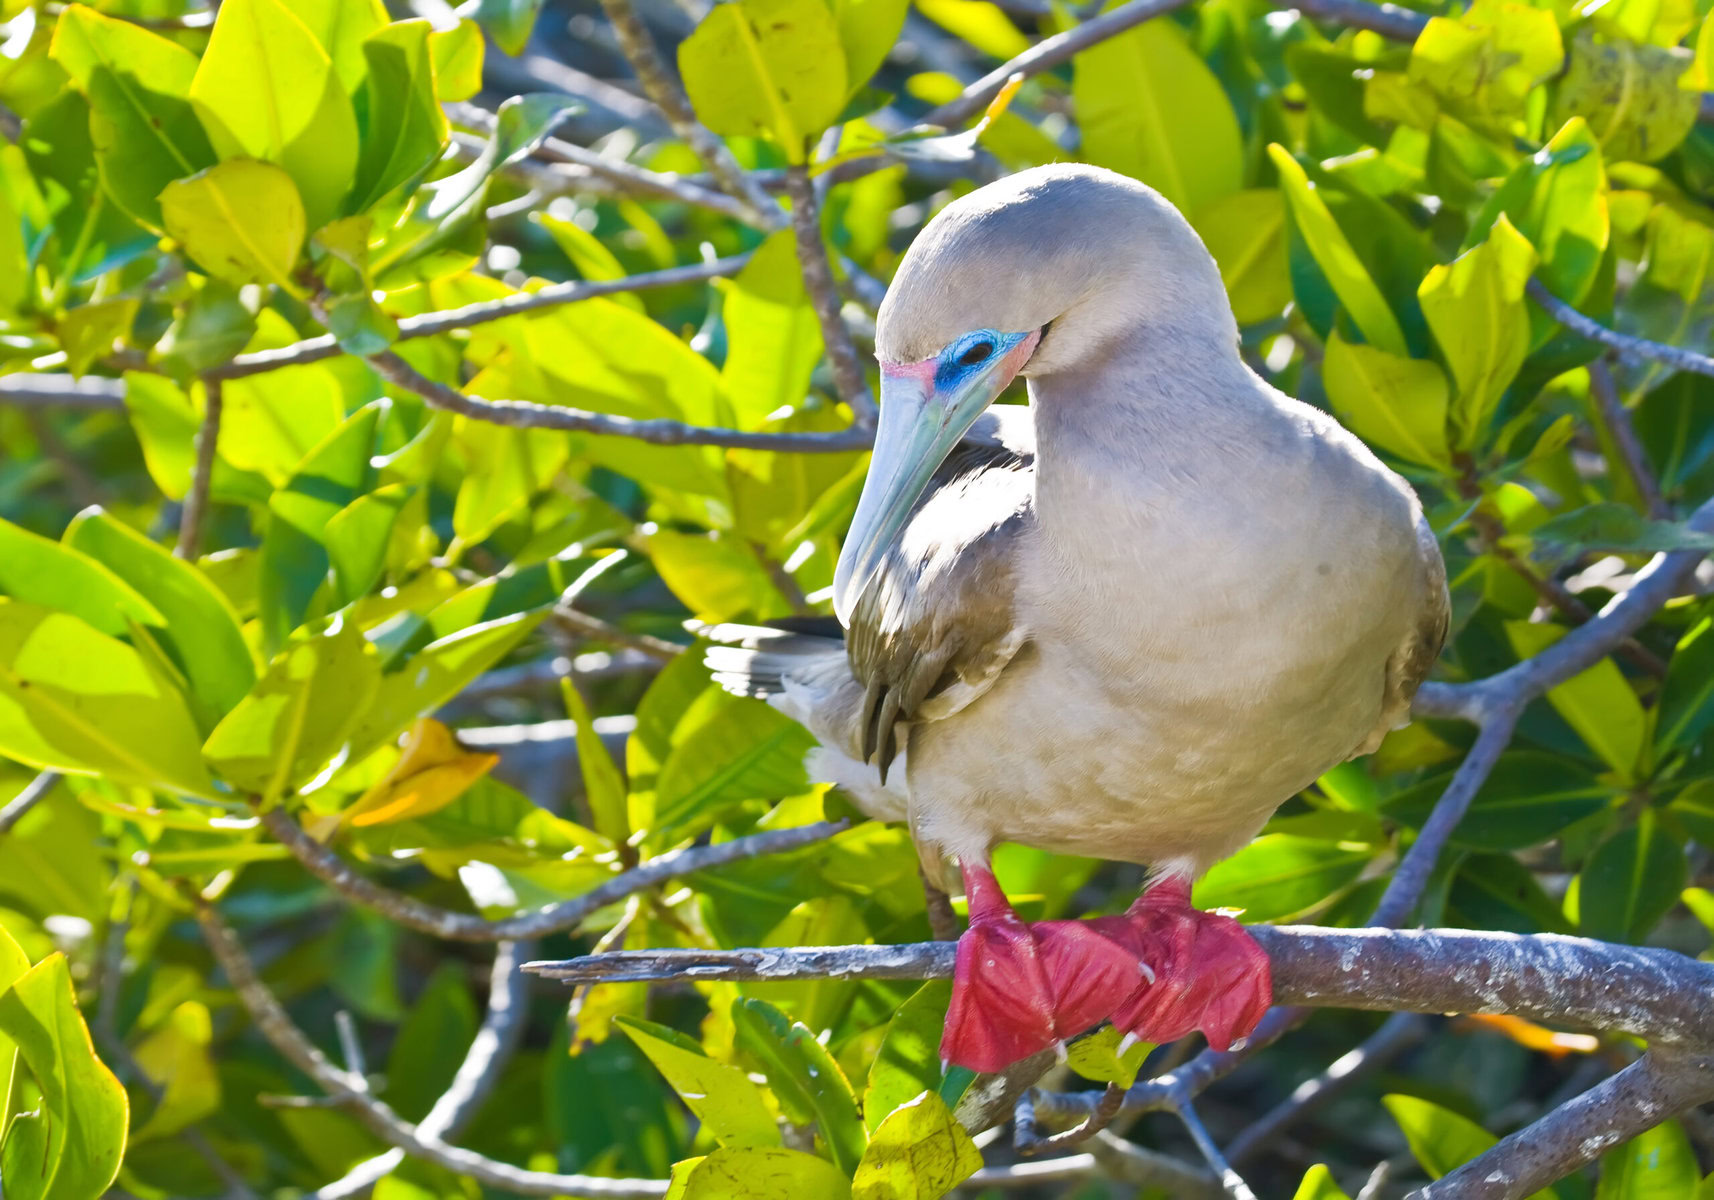 A red-footed booby sits on a branch.